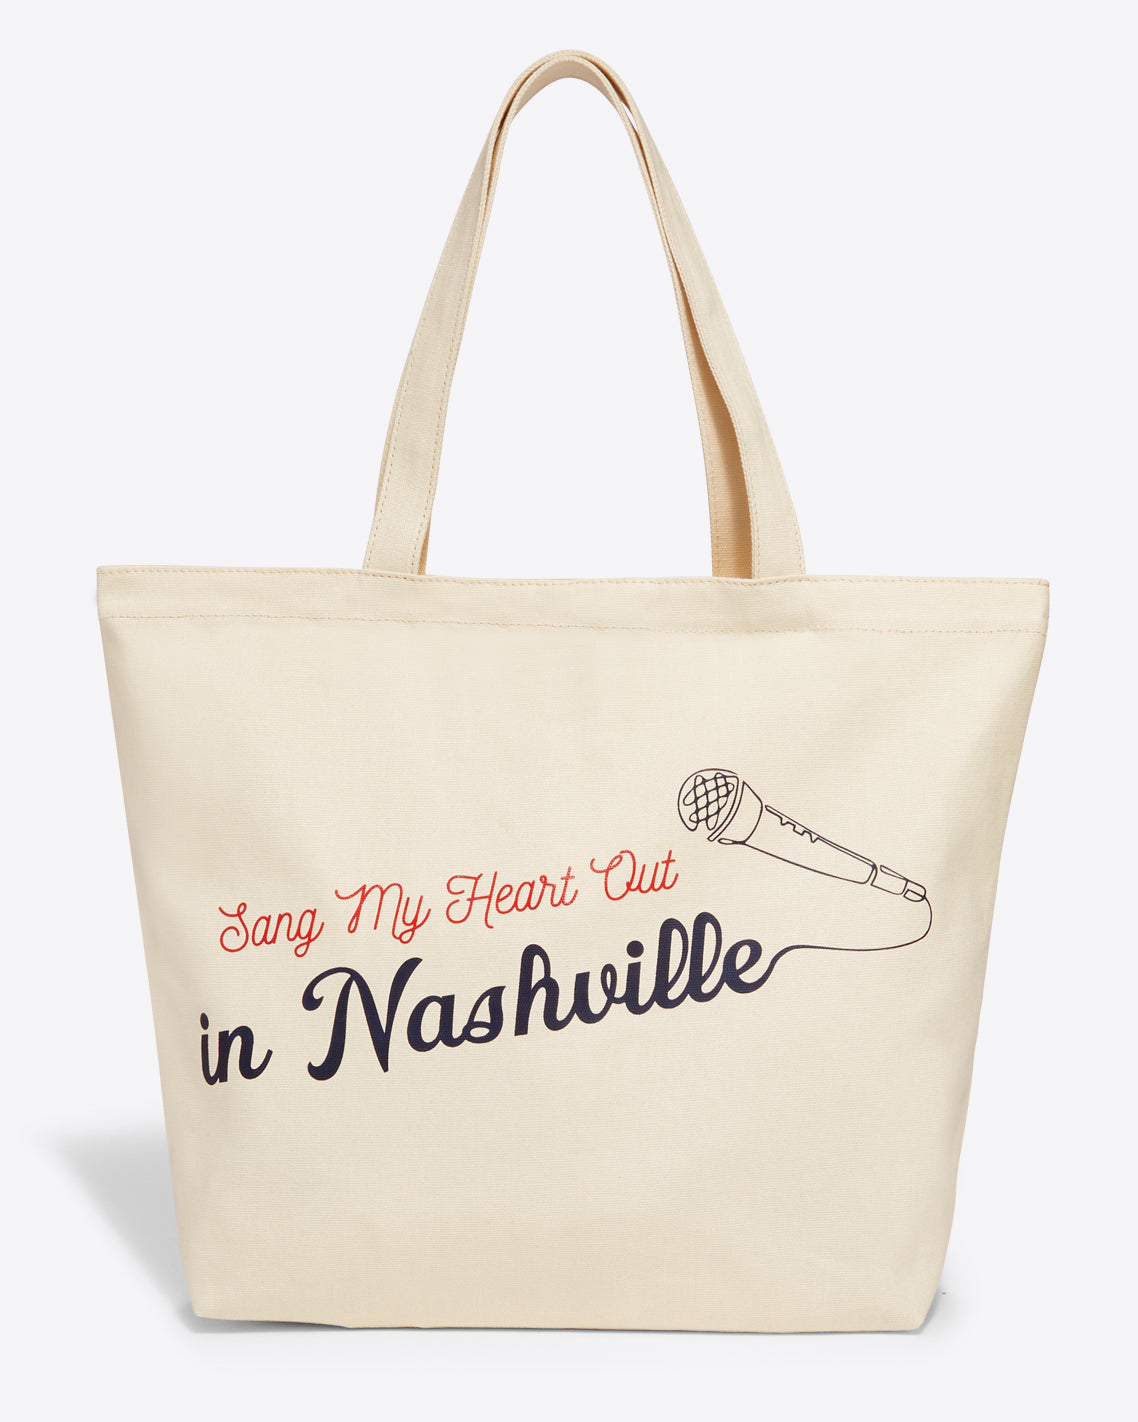 Sang My Heart Out in Nashville Canvas Tote